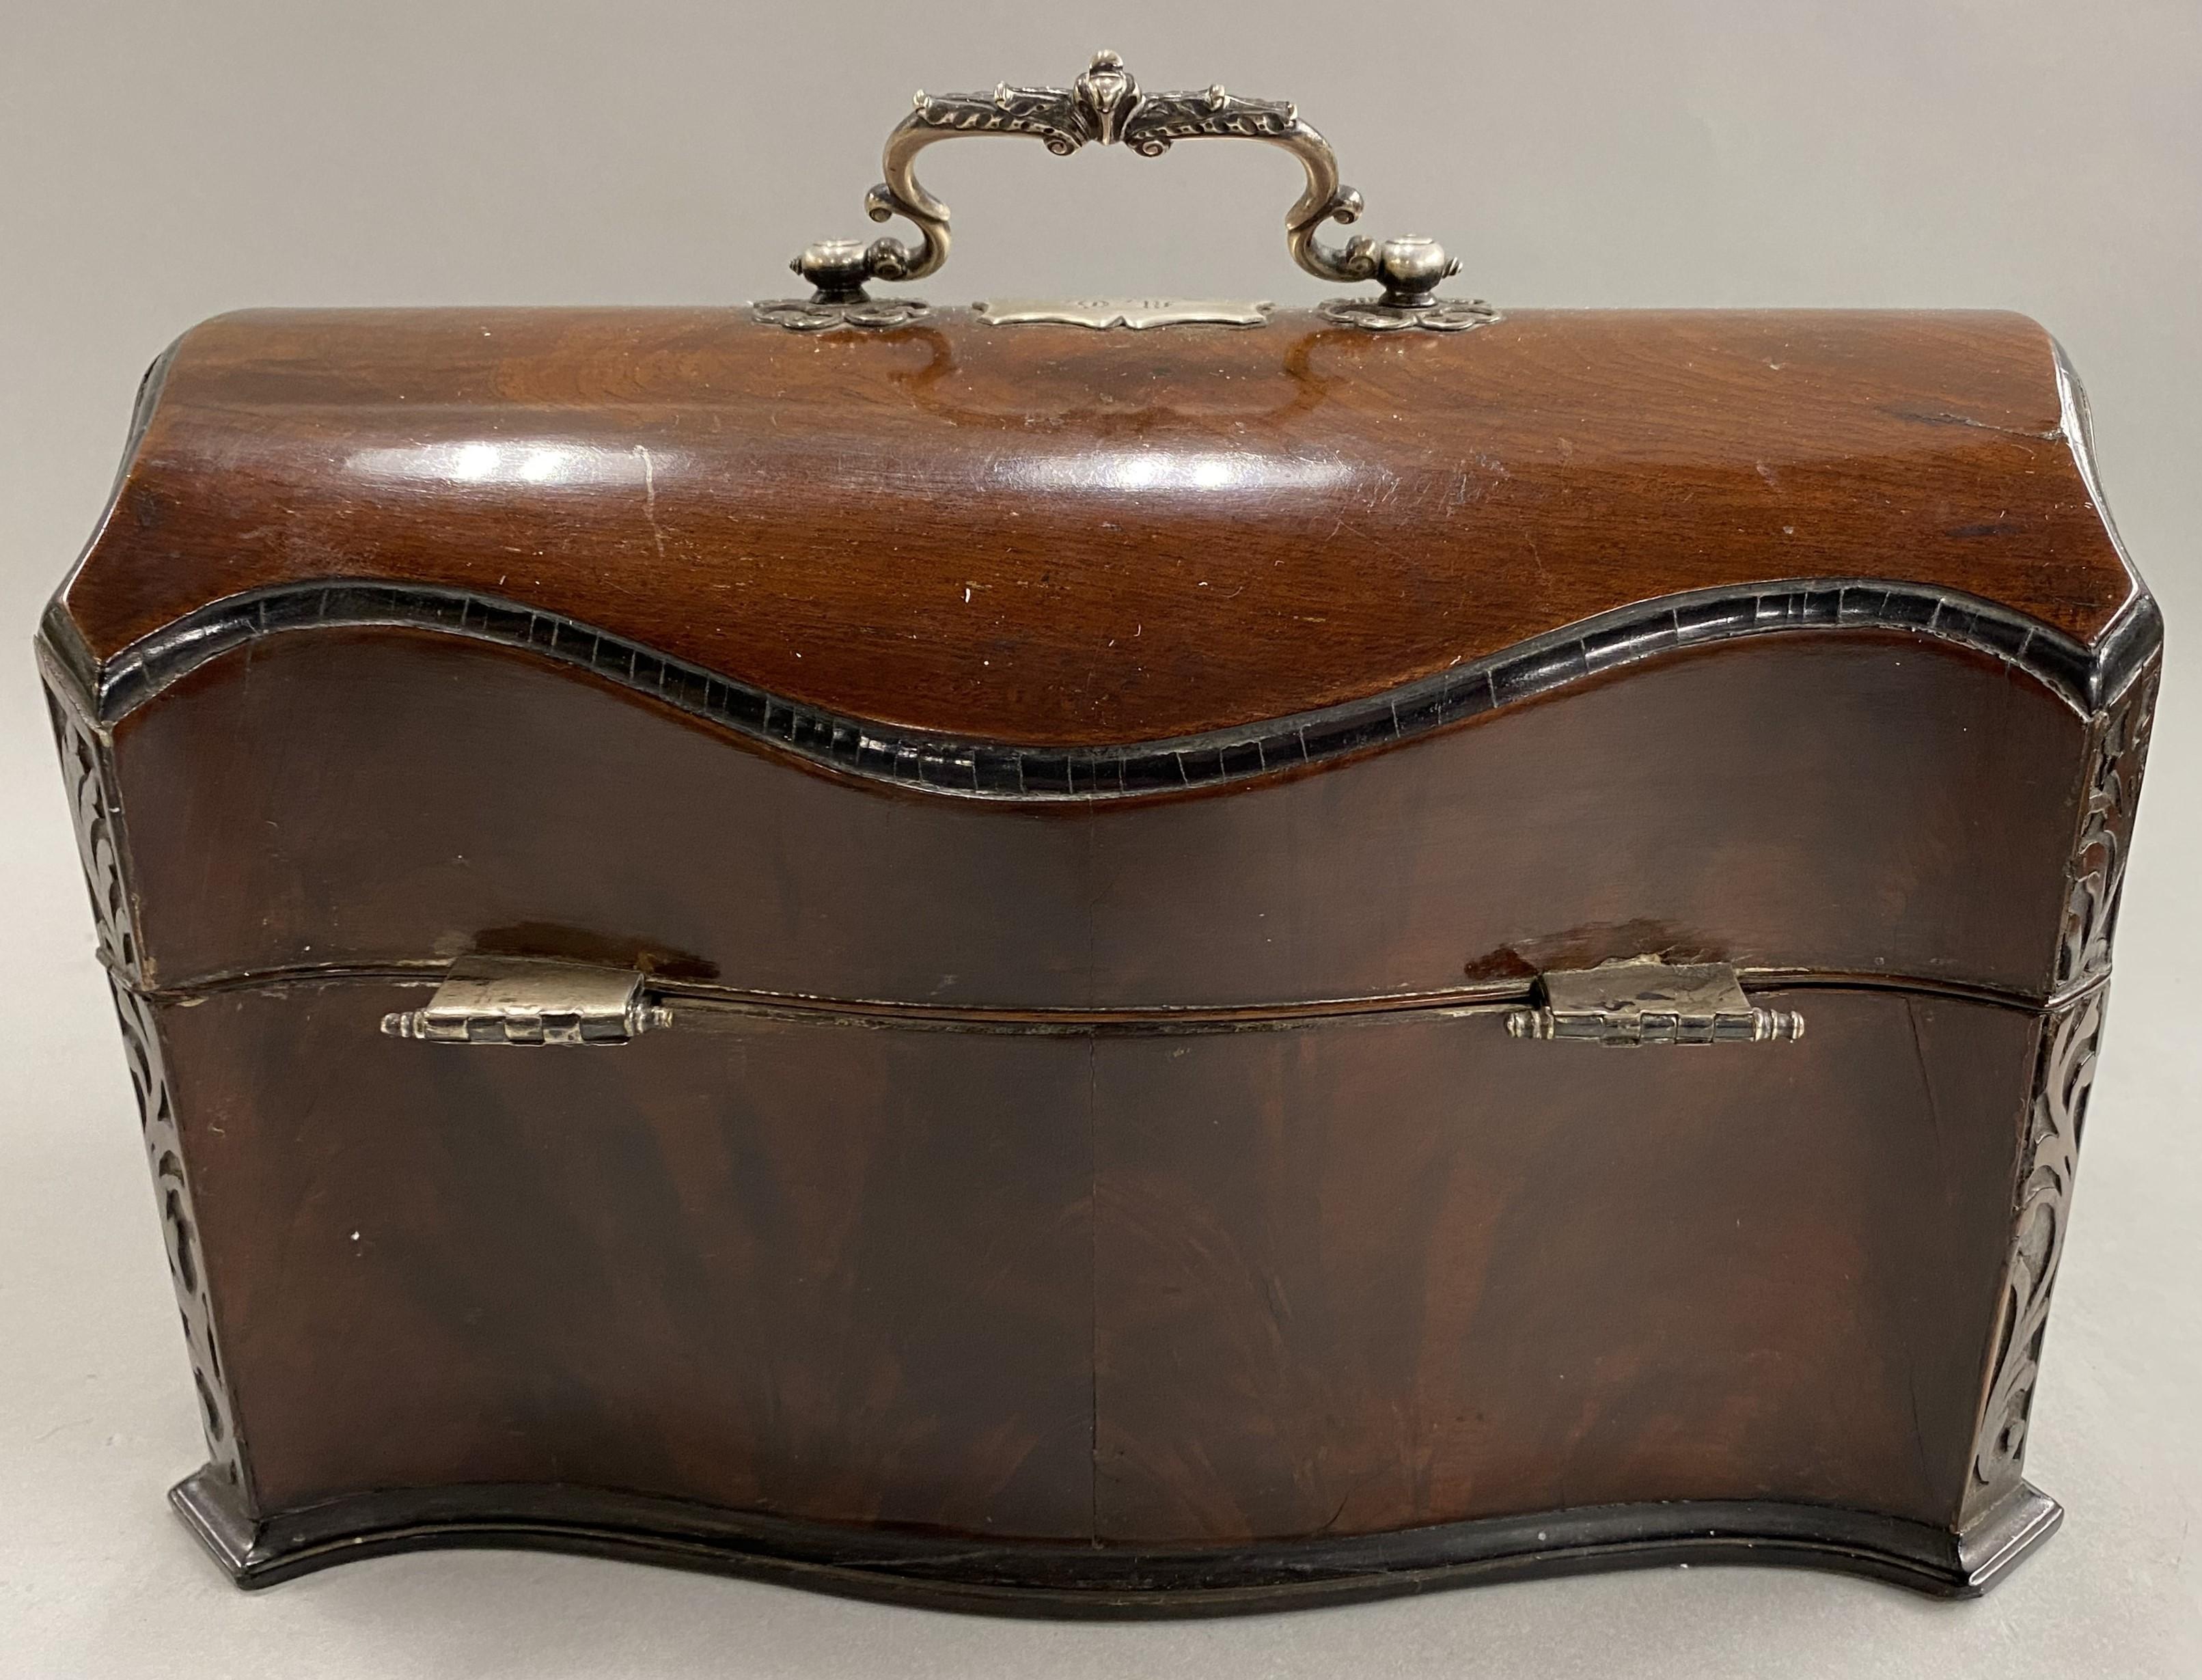 19th c English Chippendale Style Mahogany Tea Caddy with Silver Plate Tea Boxes In Good Condition For Sale In Milford, NH